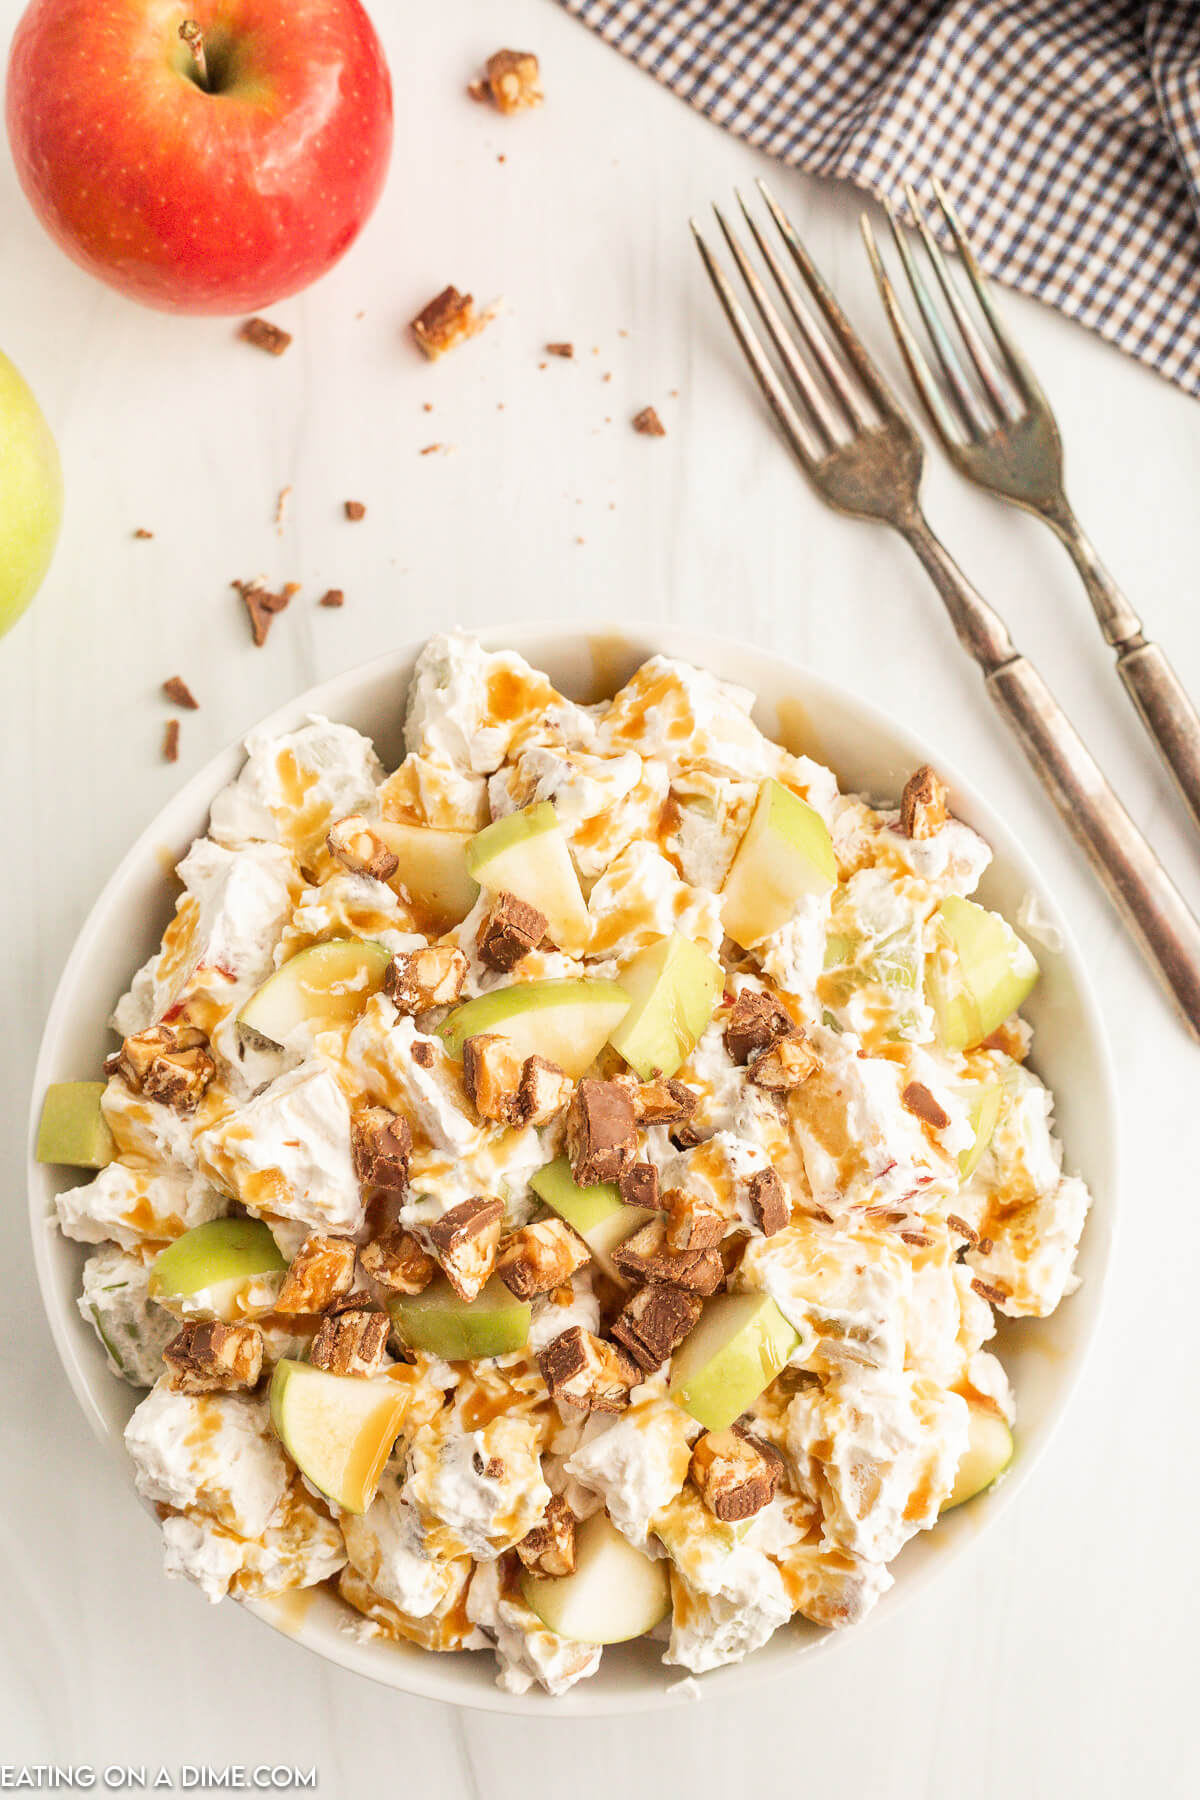 Apple Snickers Salad combined together and topped with extra apples and snickers in a bowl